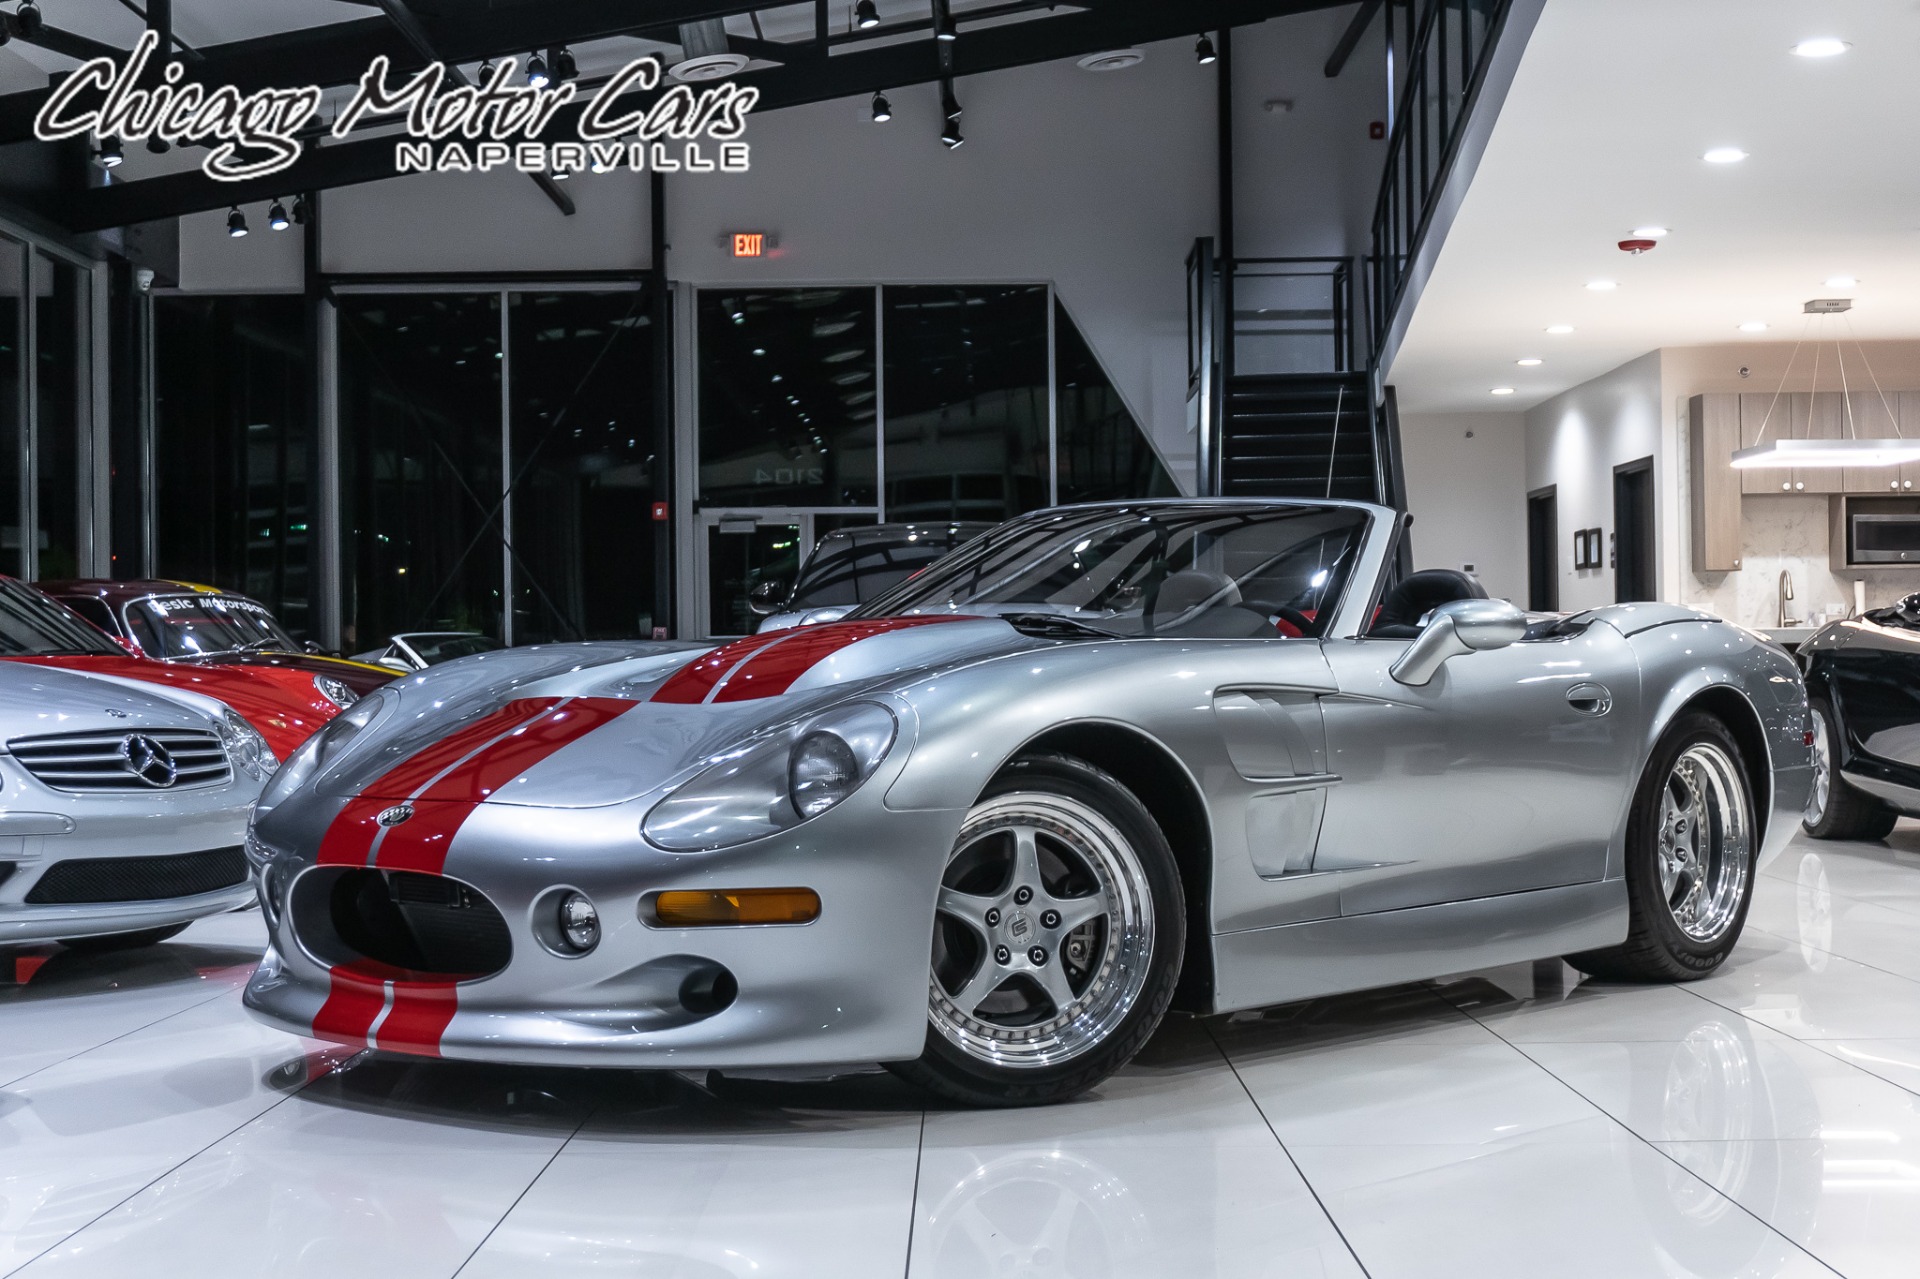 Used-1999-SHELBY-SERIES-1-ROADSTER-6-SPEED--4-OF-249-PRODUCED-523-ORIGINAL-MILES